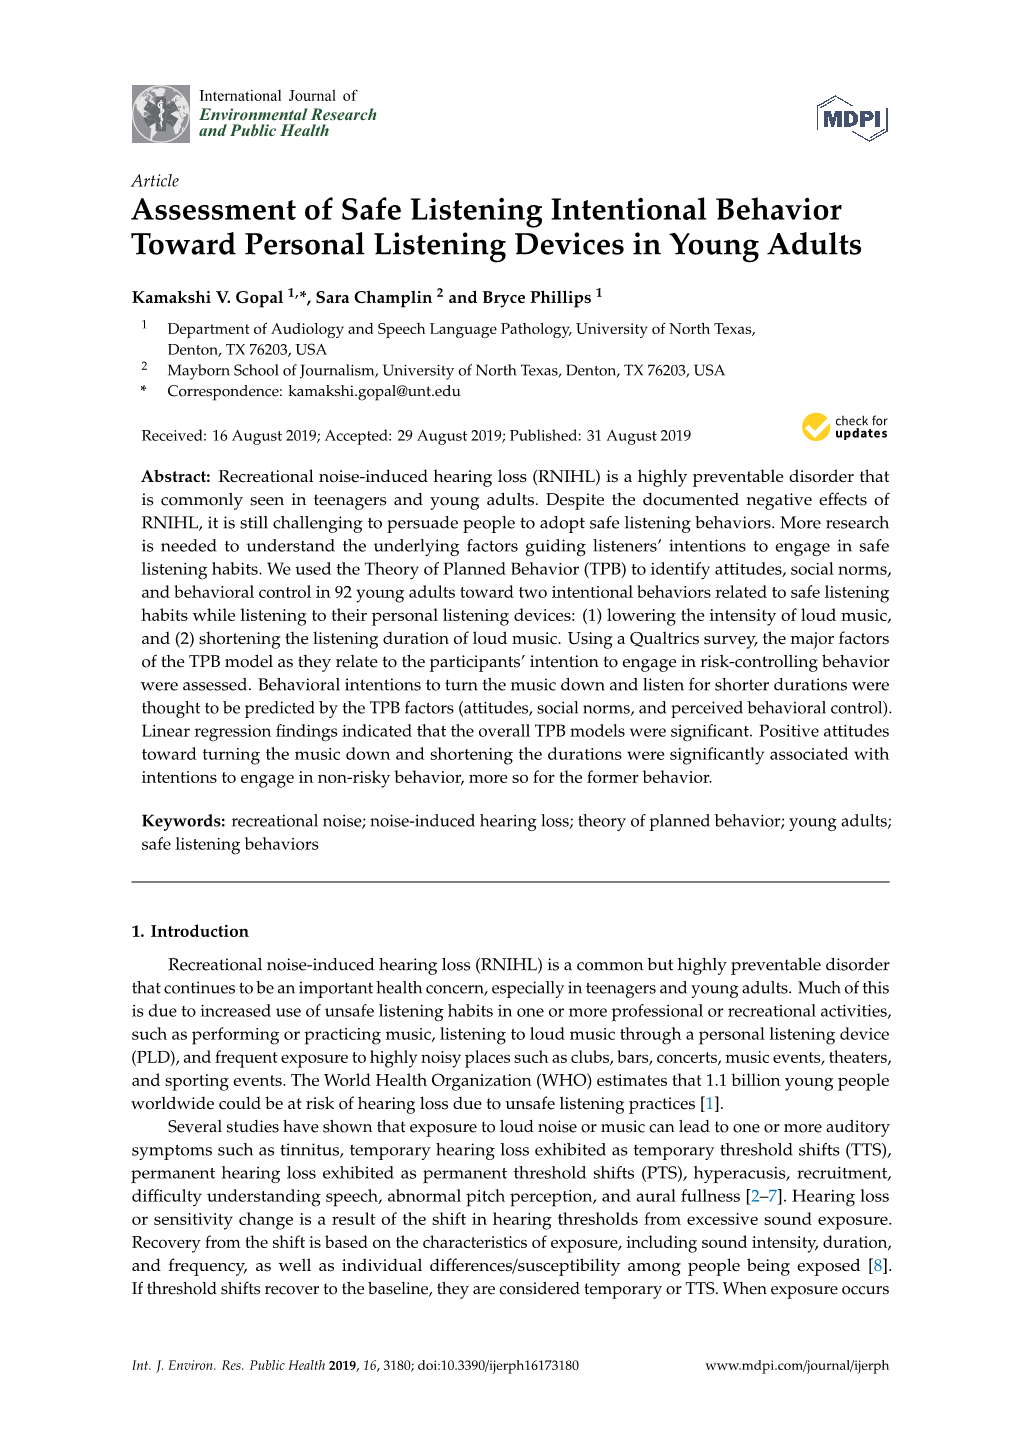 Assessment of Safe Listening Intentional Behavior Toward Personal Listening Devices in Young Adults